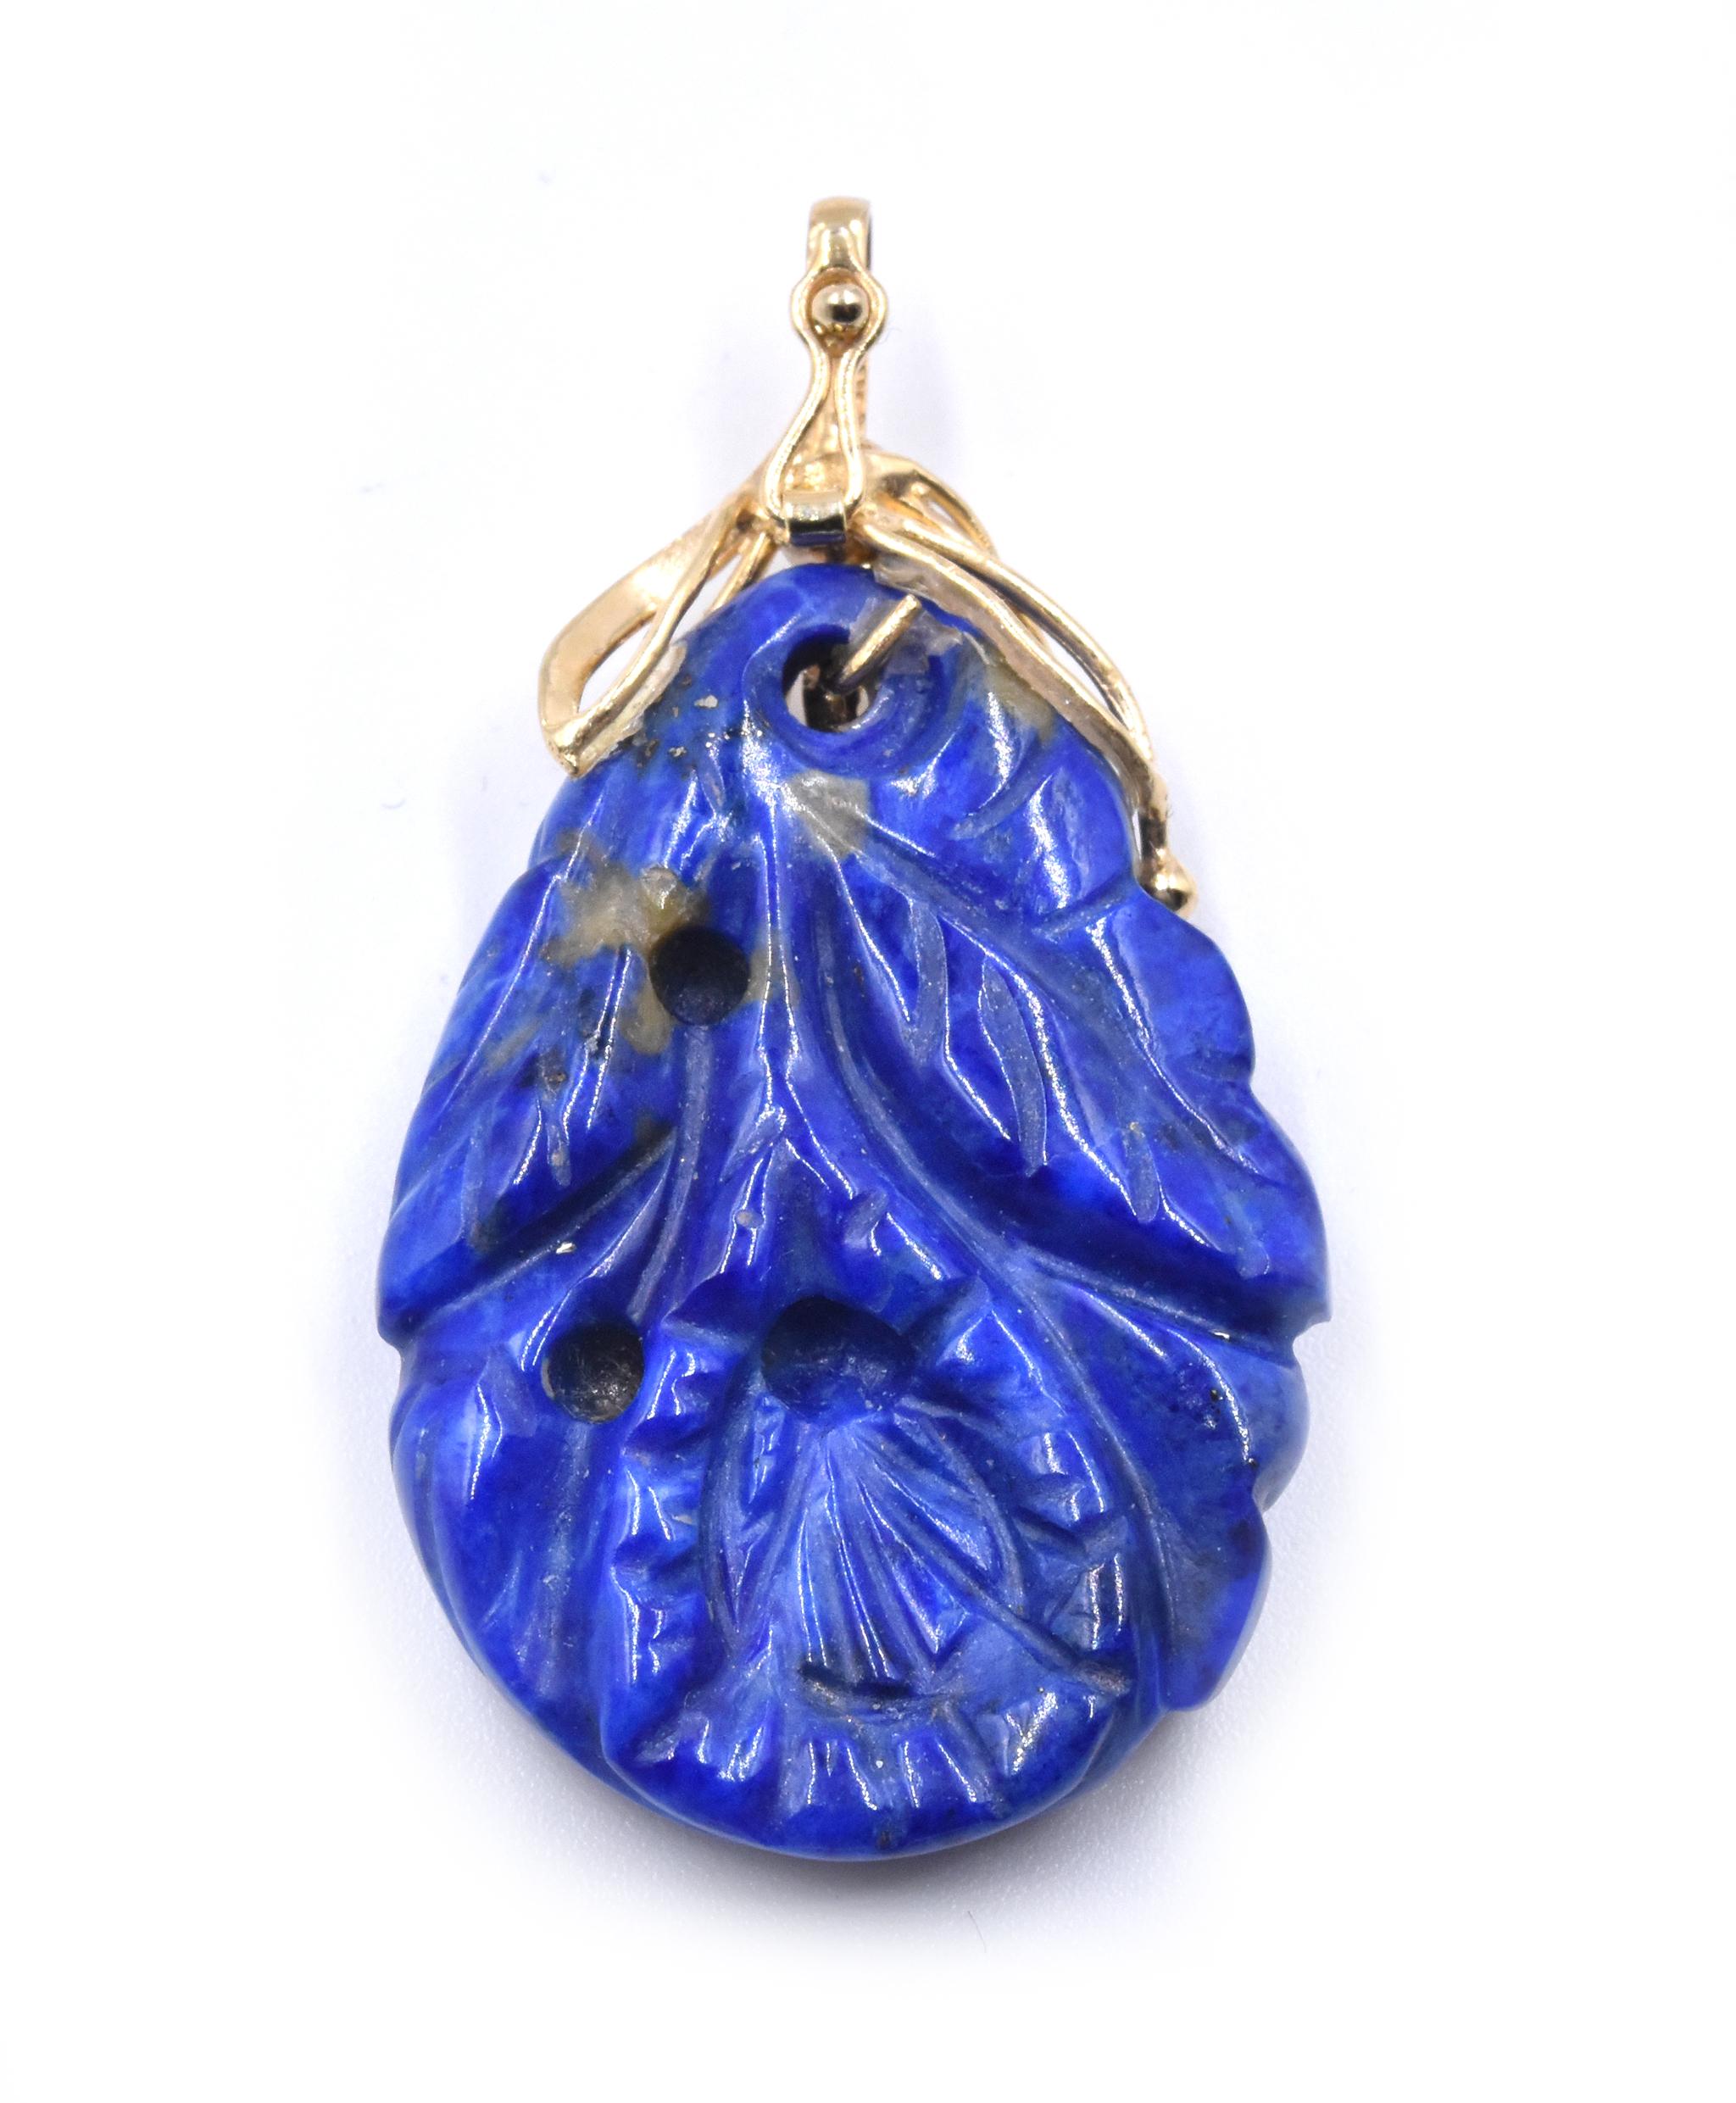 14 Karat Yellow Gold Carved Lapis Pendant In Excellent Condition For Sale In Scottsdale, AZ